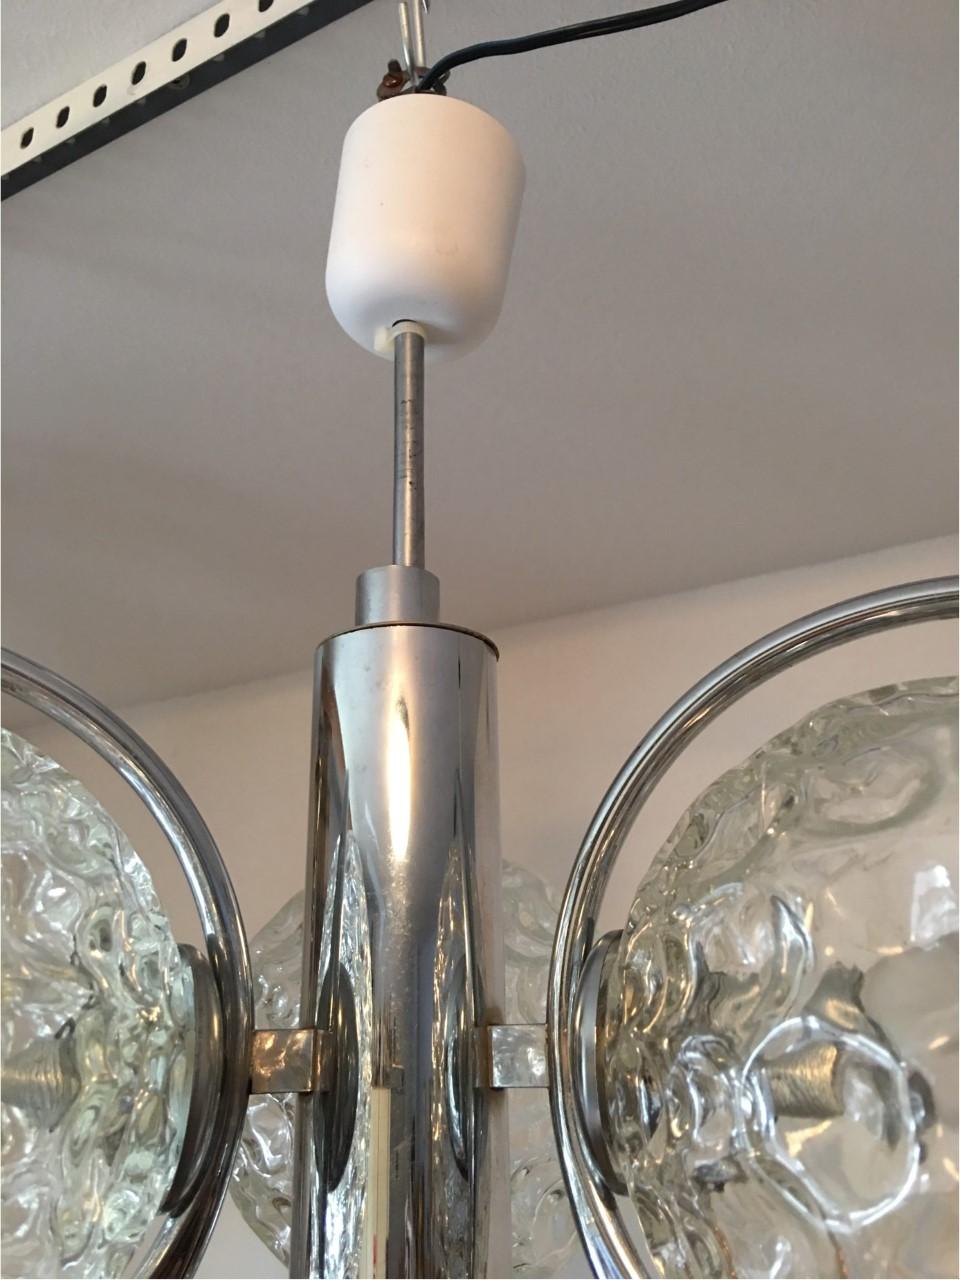 Three Crater Glass Ball and Chrome Chandelier In Good Condition For Sale In Frisco, TX